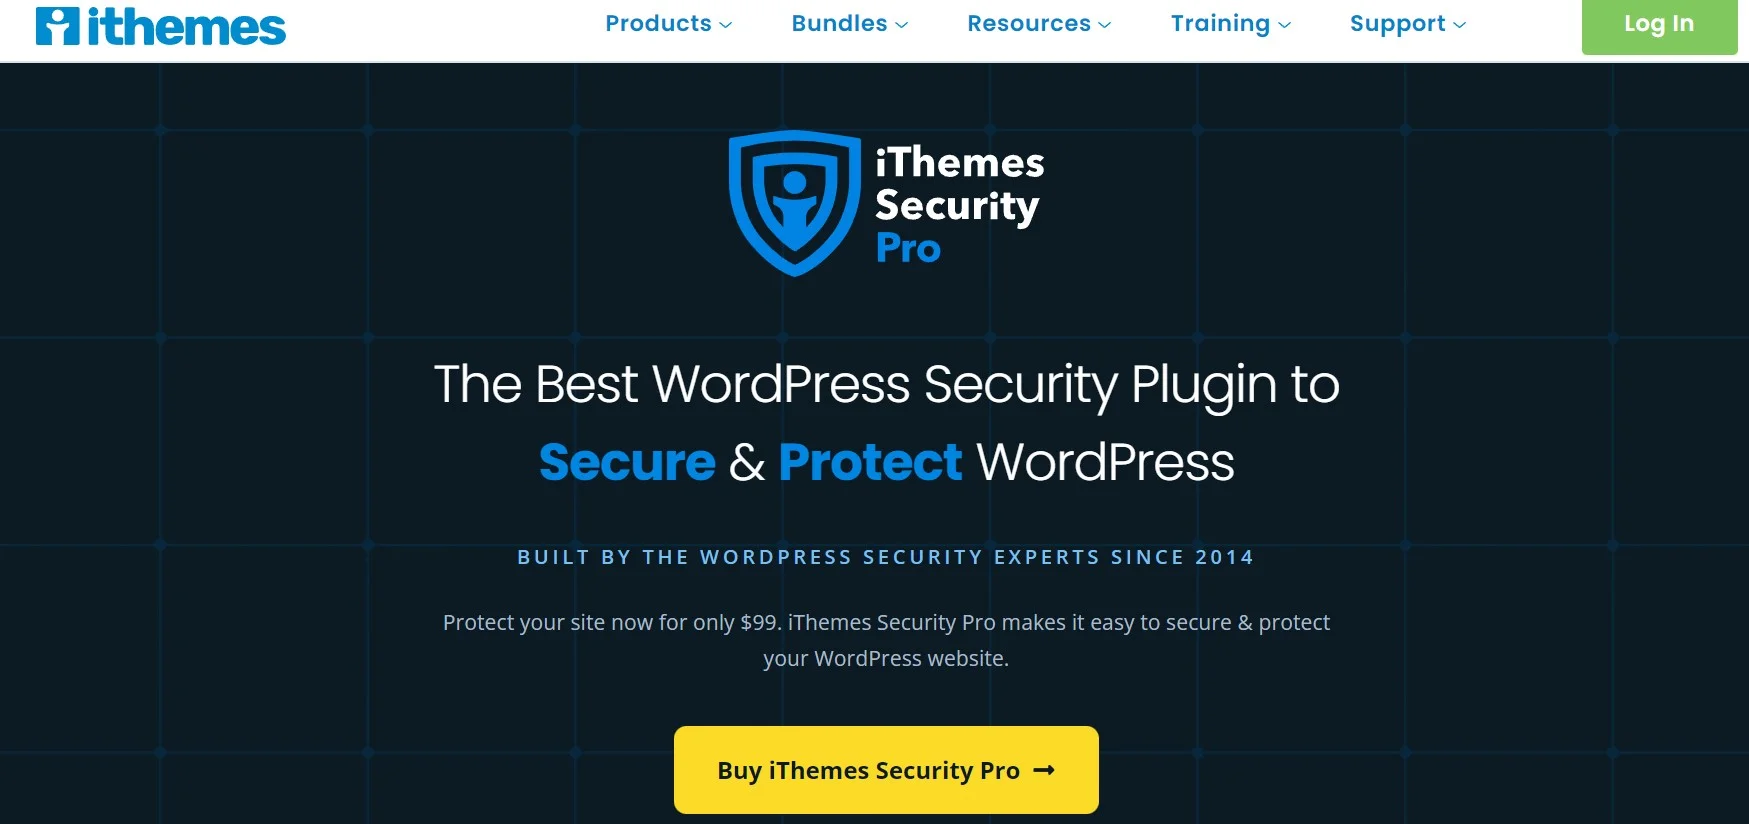 Ithemes Security Offers A Range Of Features, Including Malware Scanning And Removal.webp